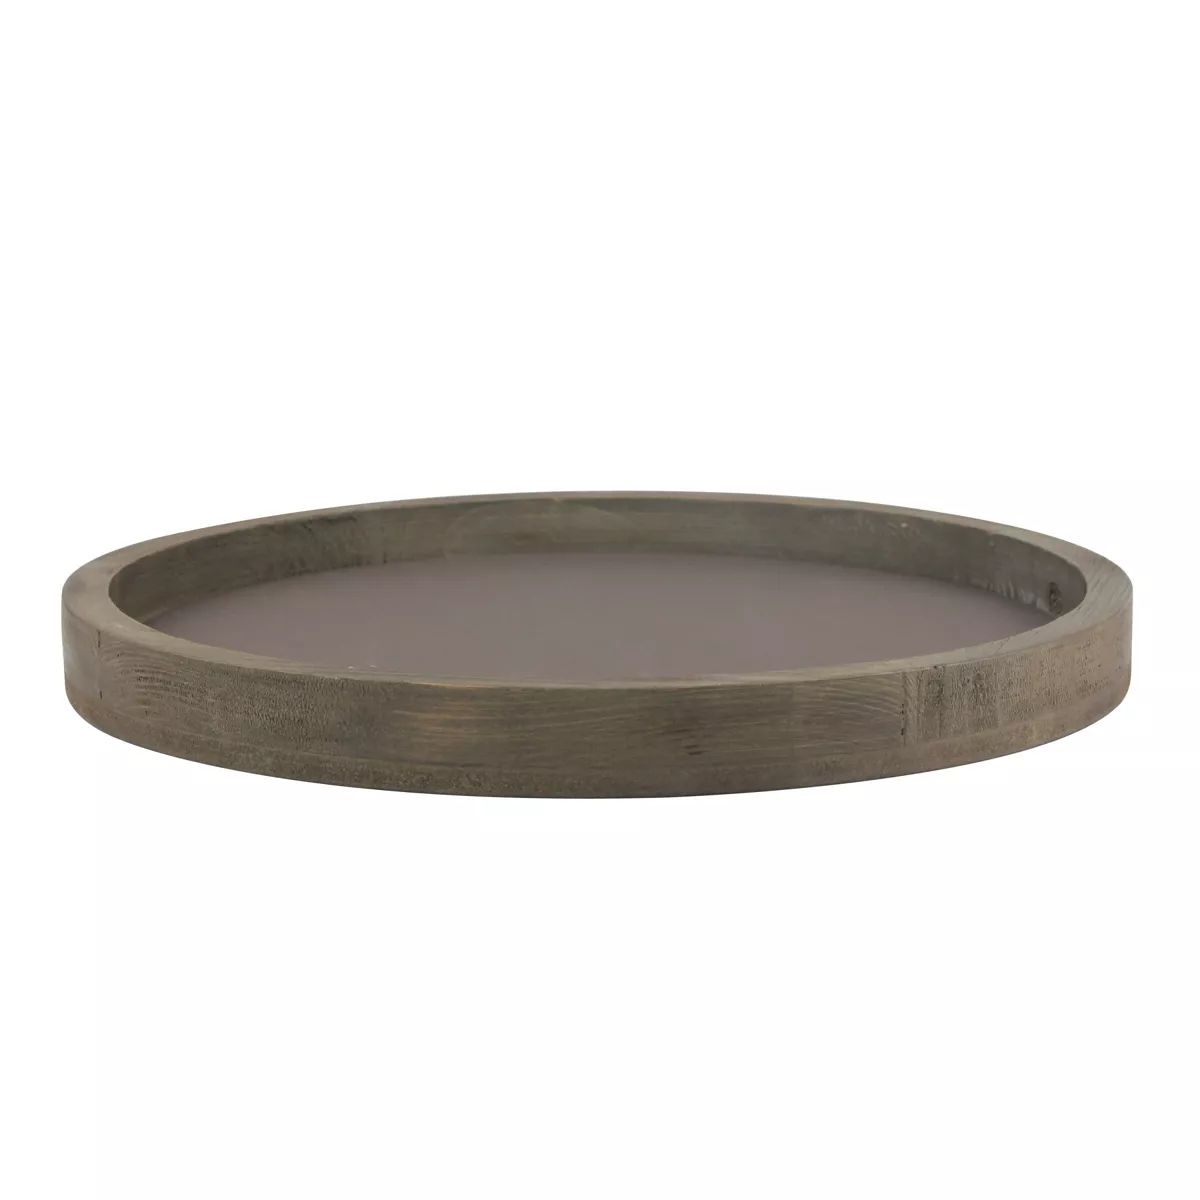 11.8" Rustic Round Wood Tray Brown - Stonebriar Collection | Target